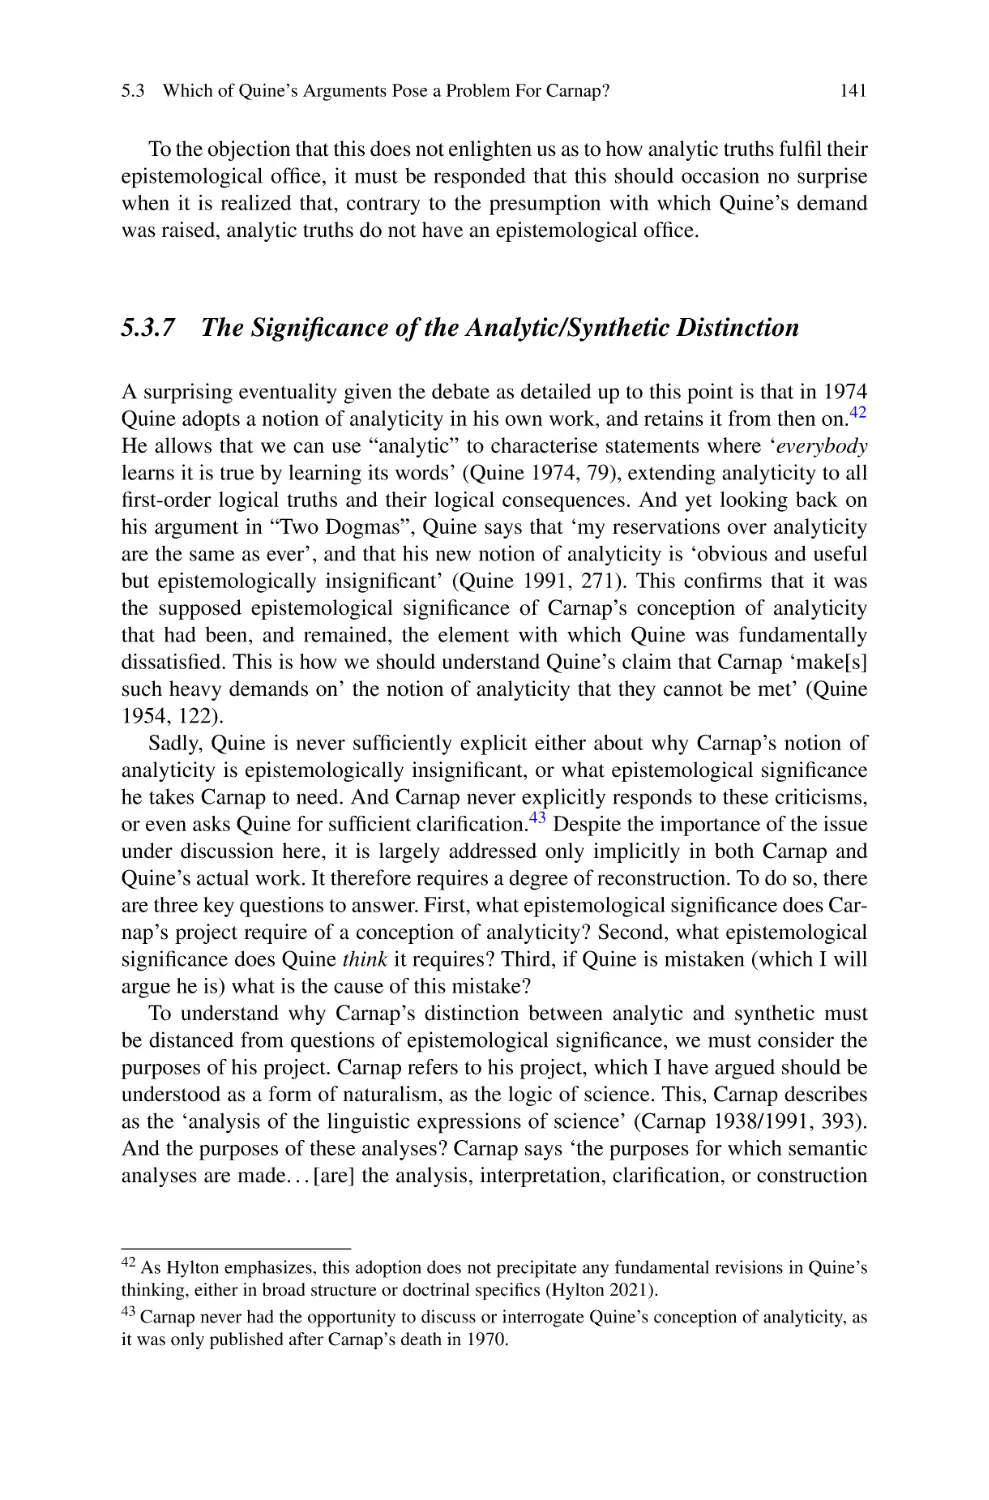 5.3.7 The Significance of the Analytic/Synthetic Distinction